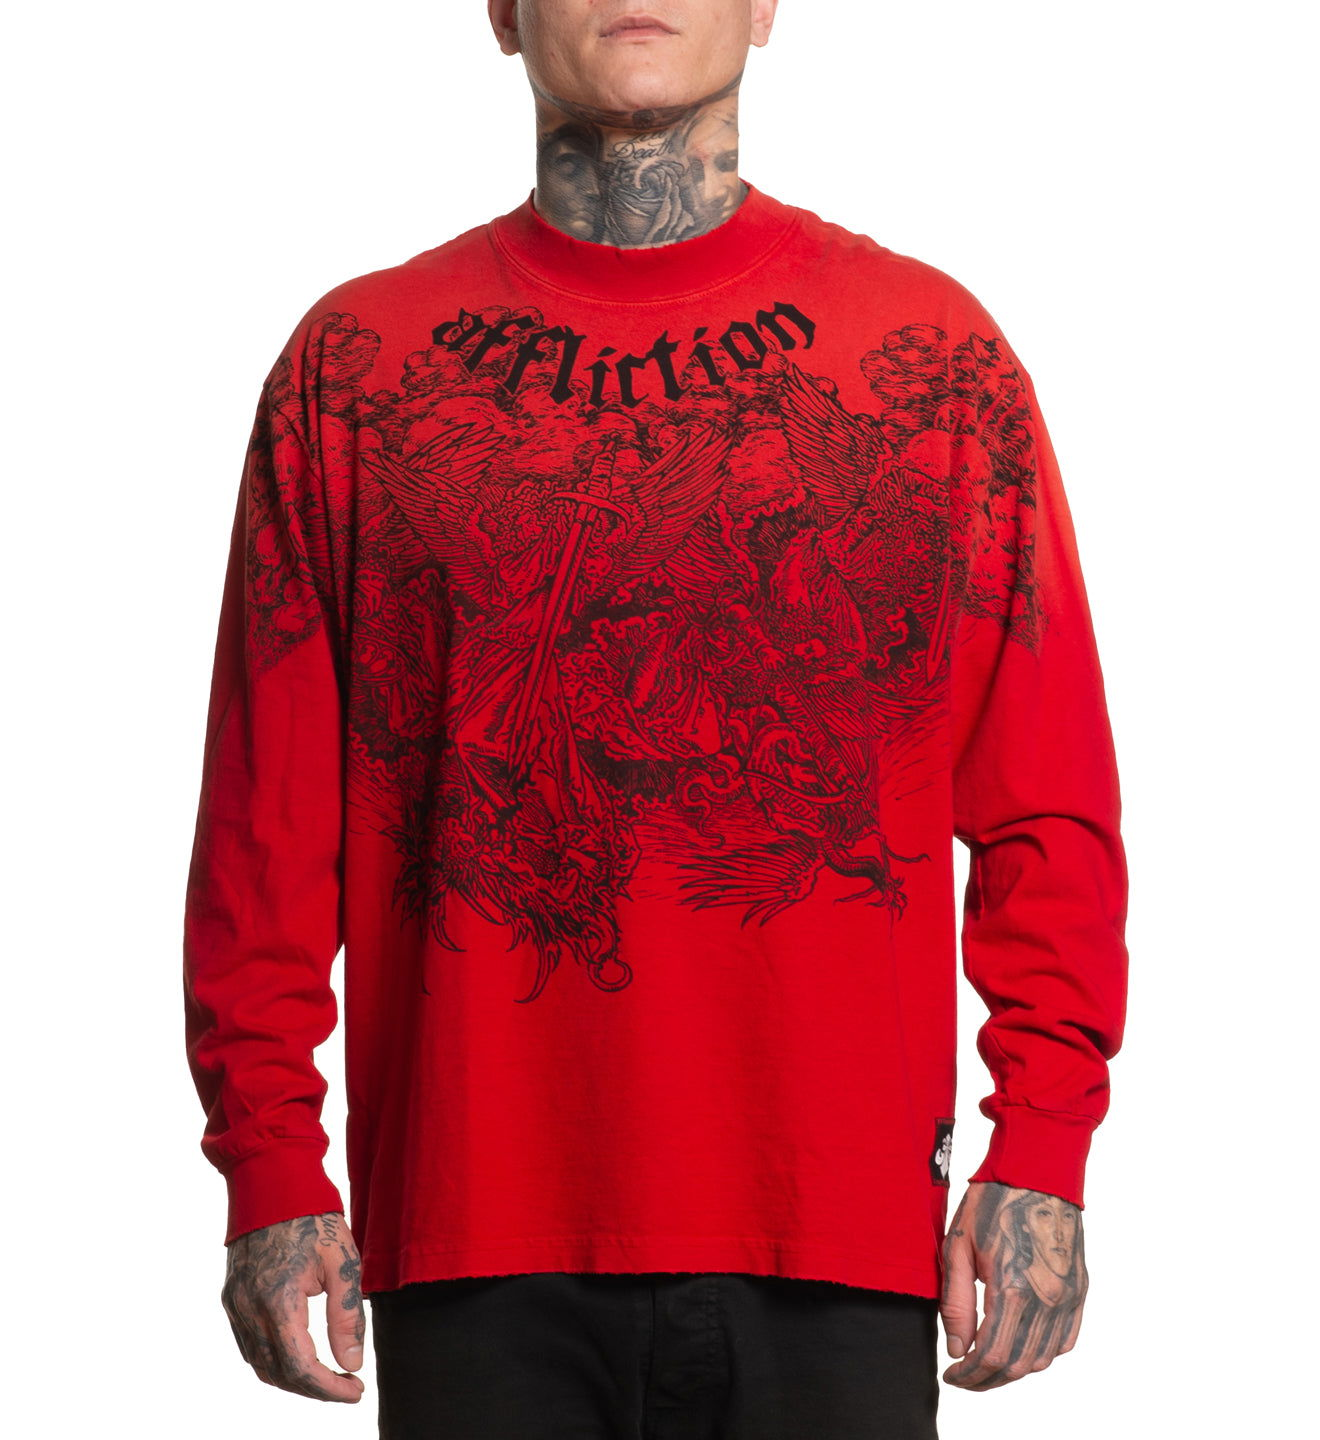 Angels - Affliction Clothing